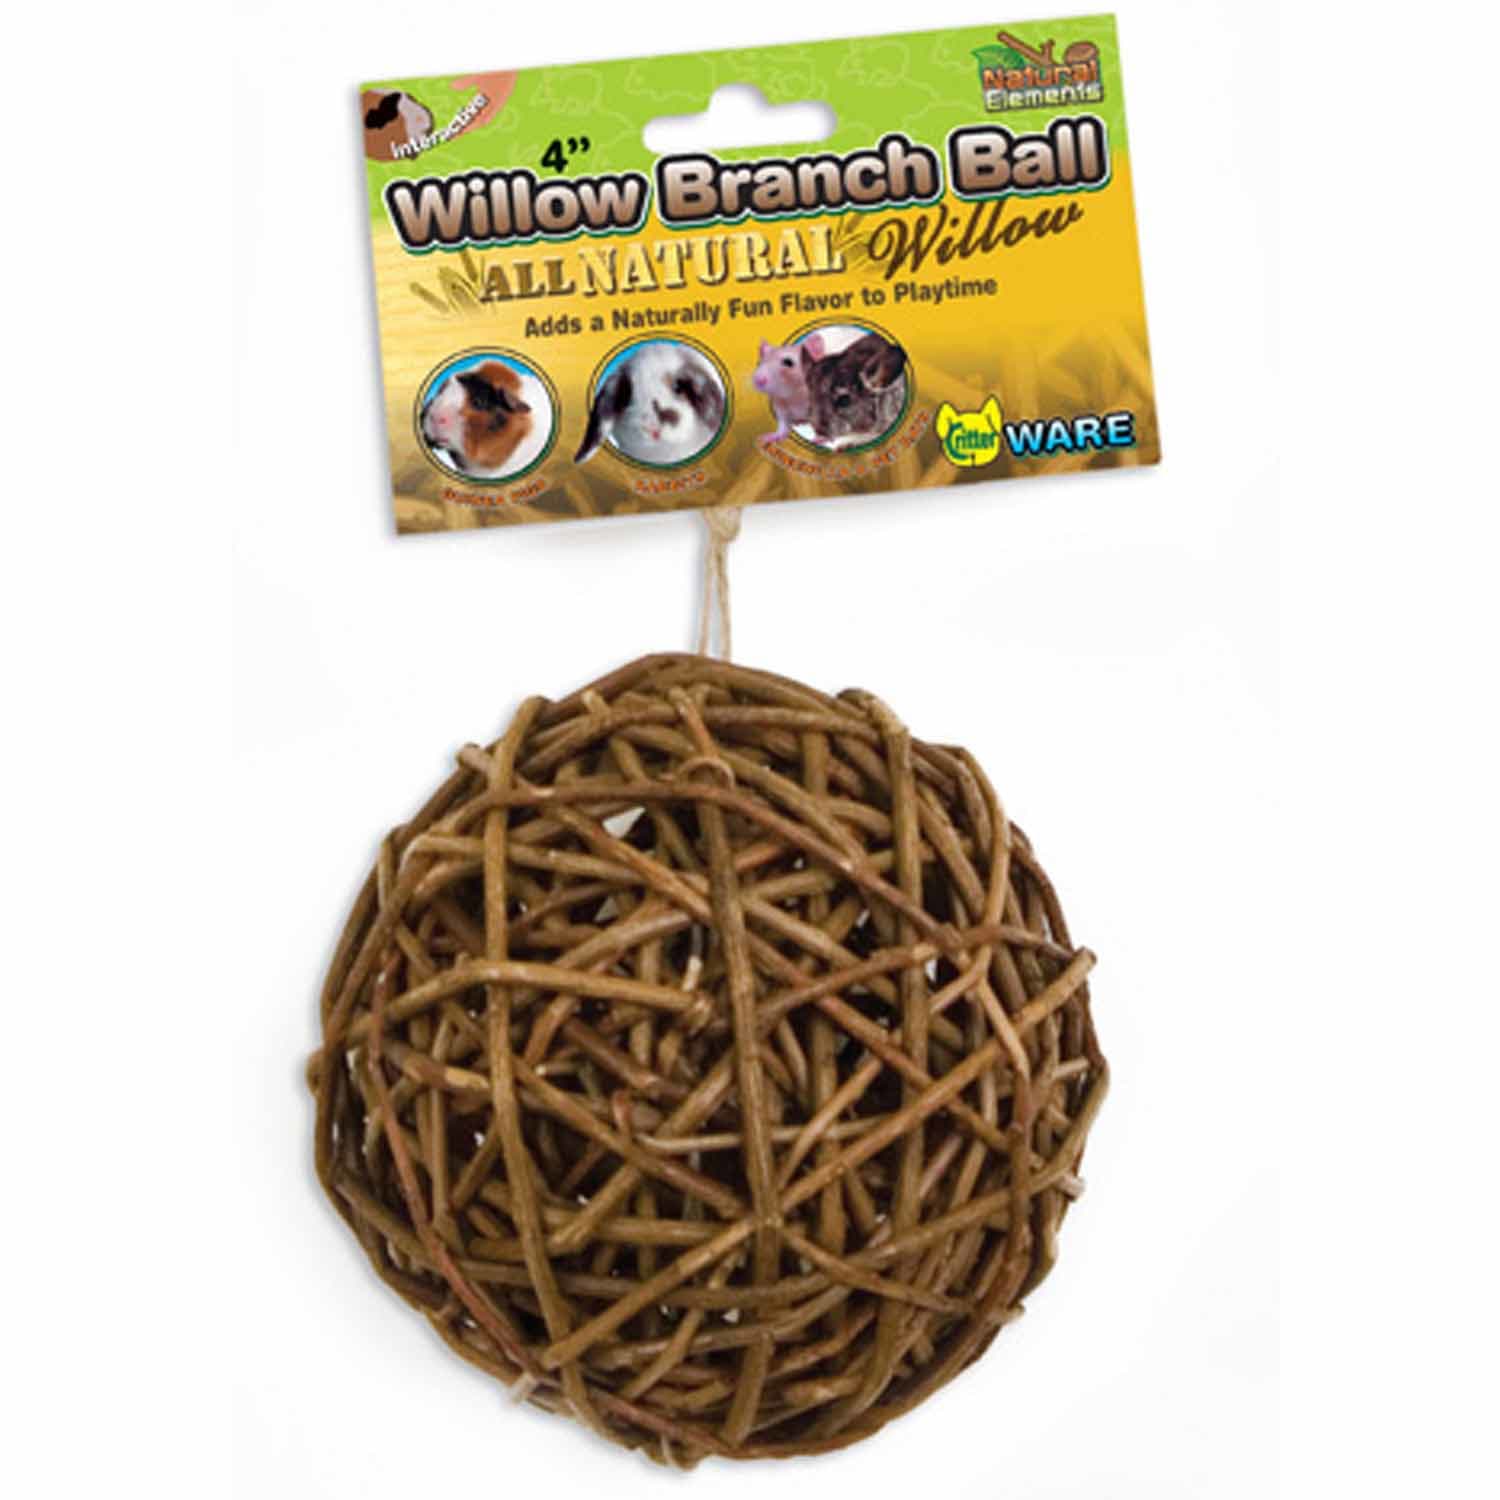 WARE Willow Branch Ball Chew Toy | Petco